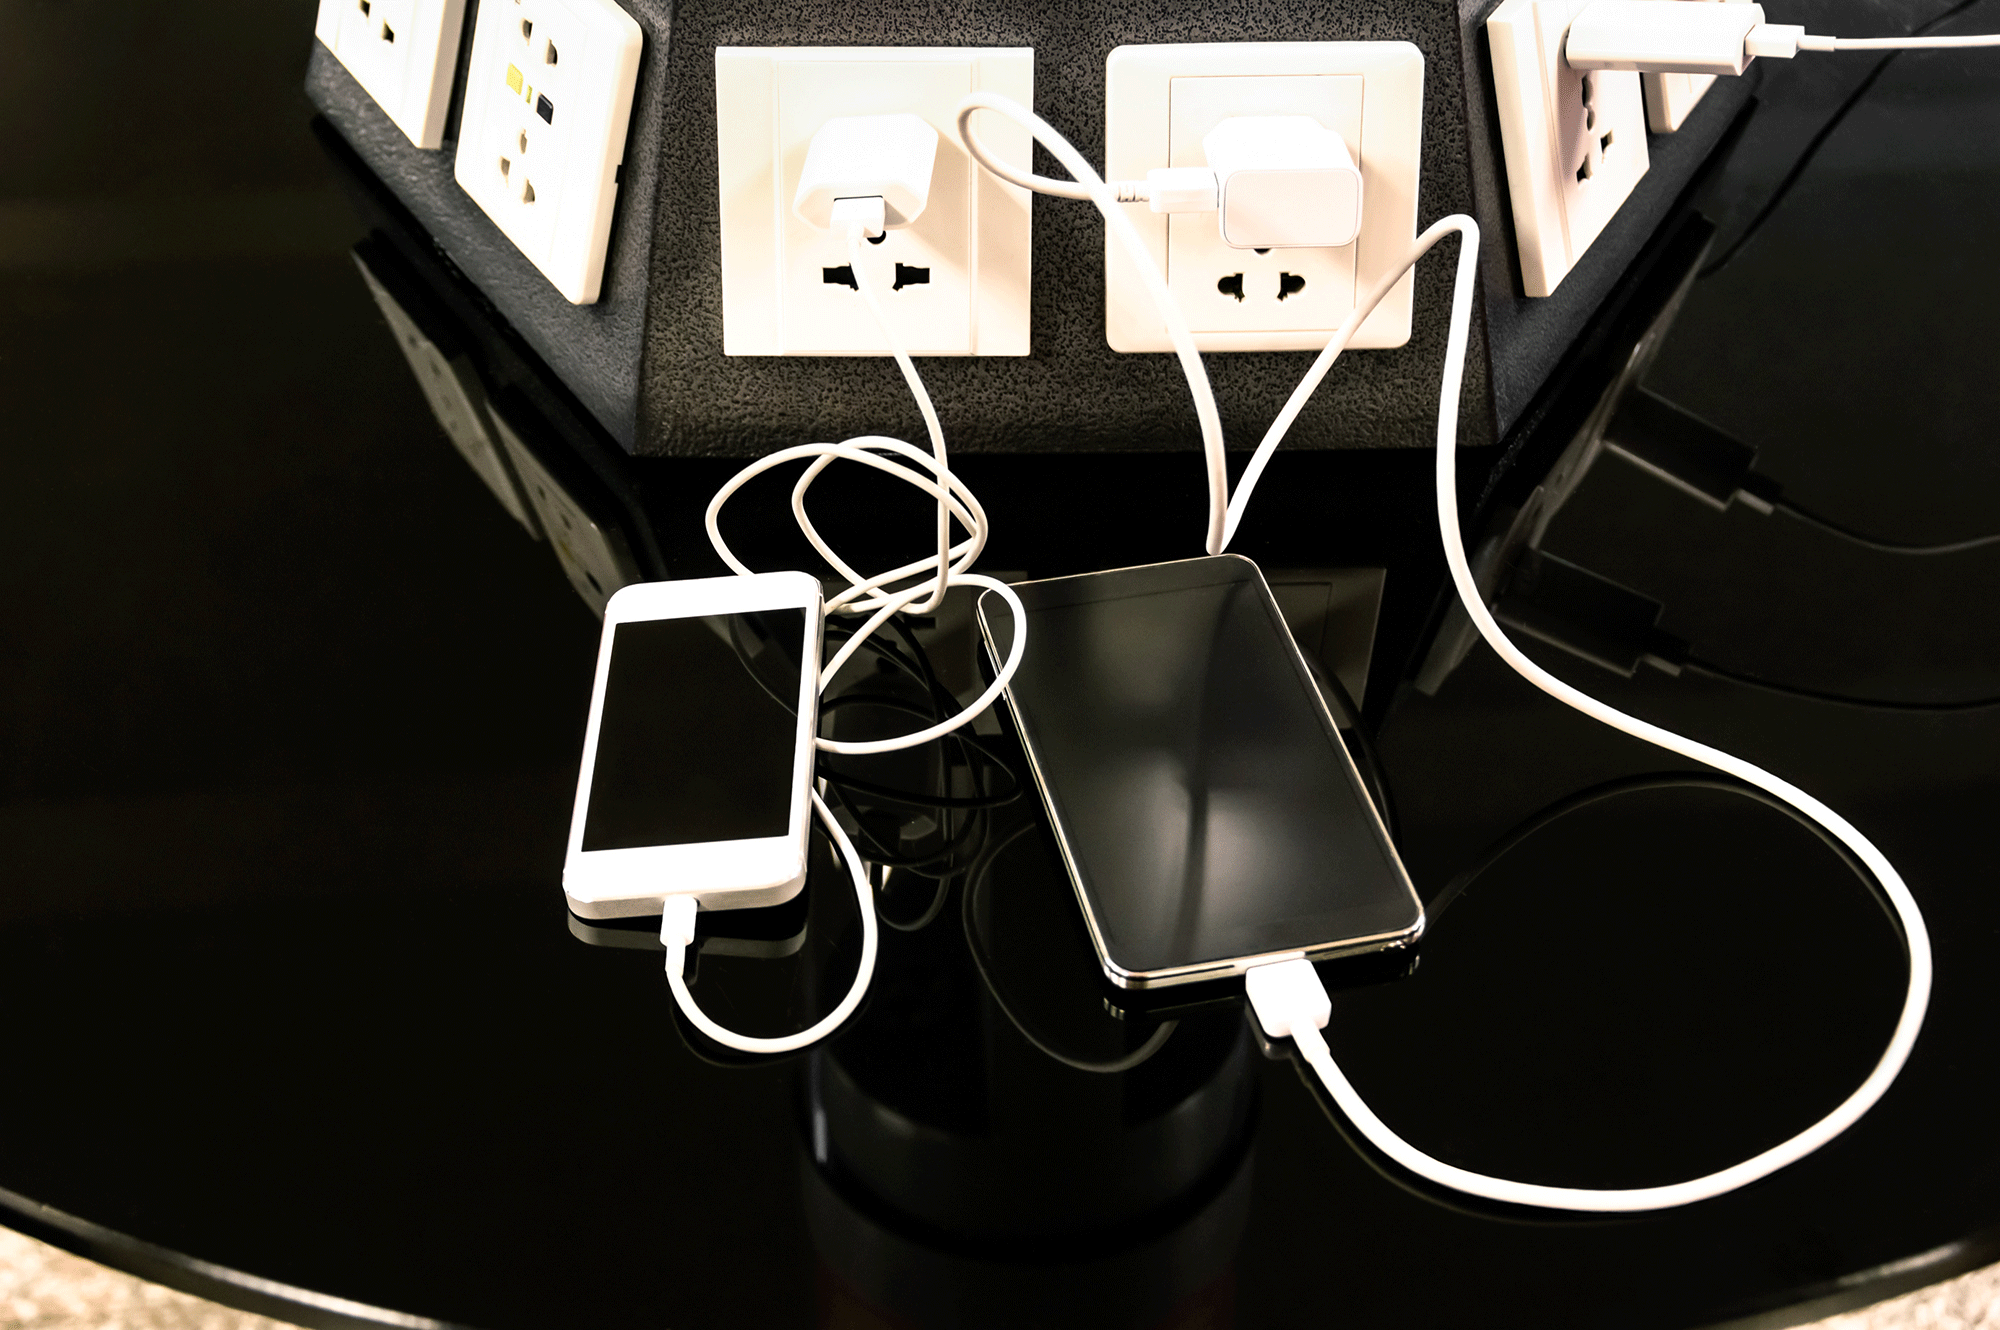 Electrical outlets for travelers